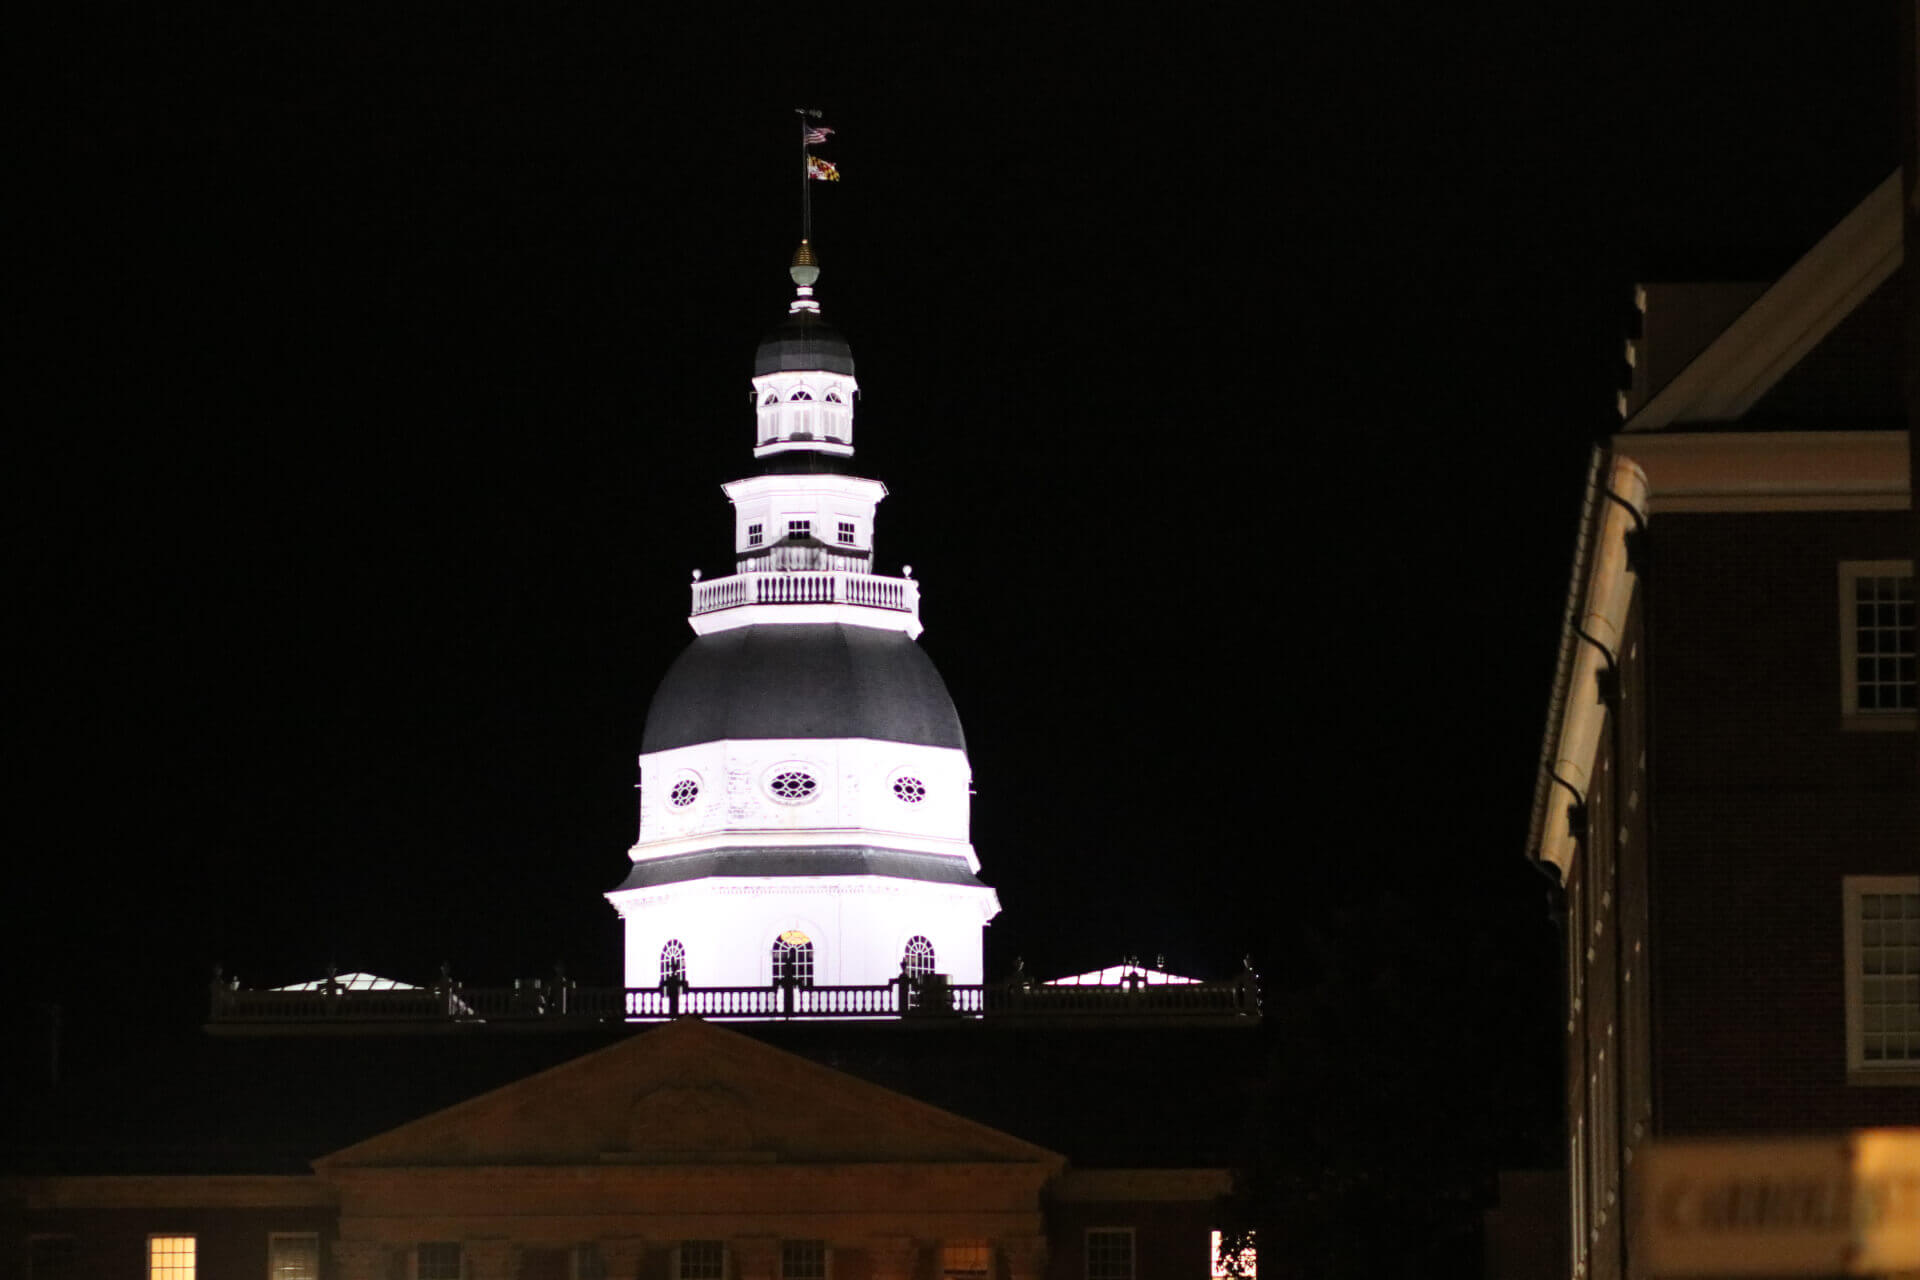 State House lit up at night